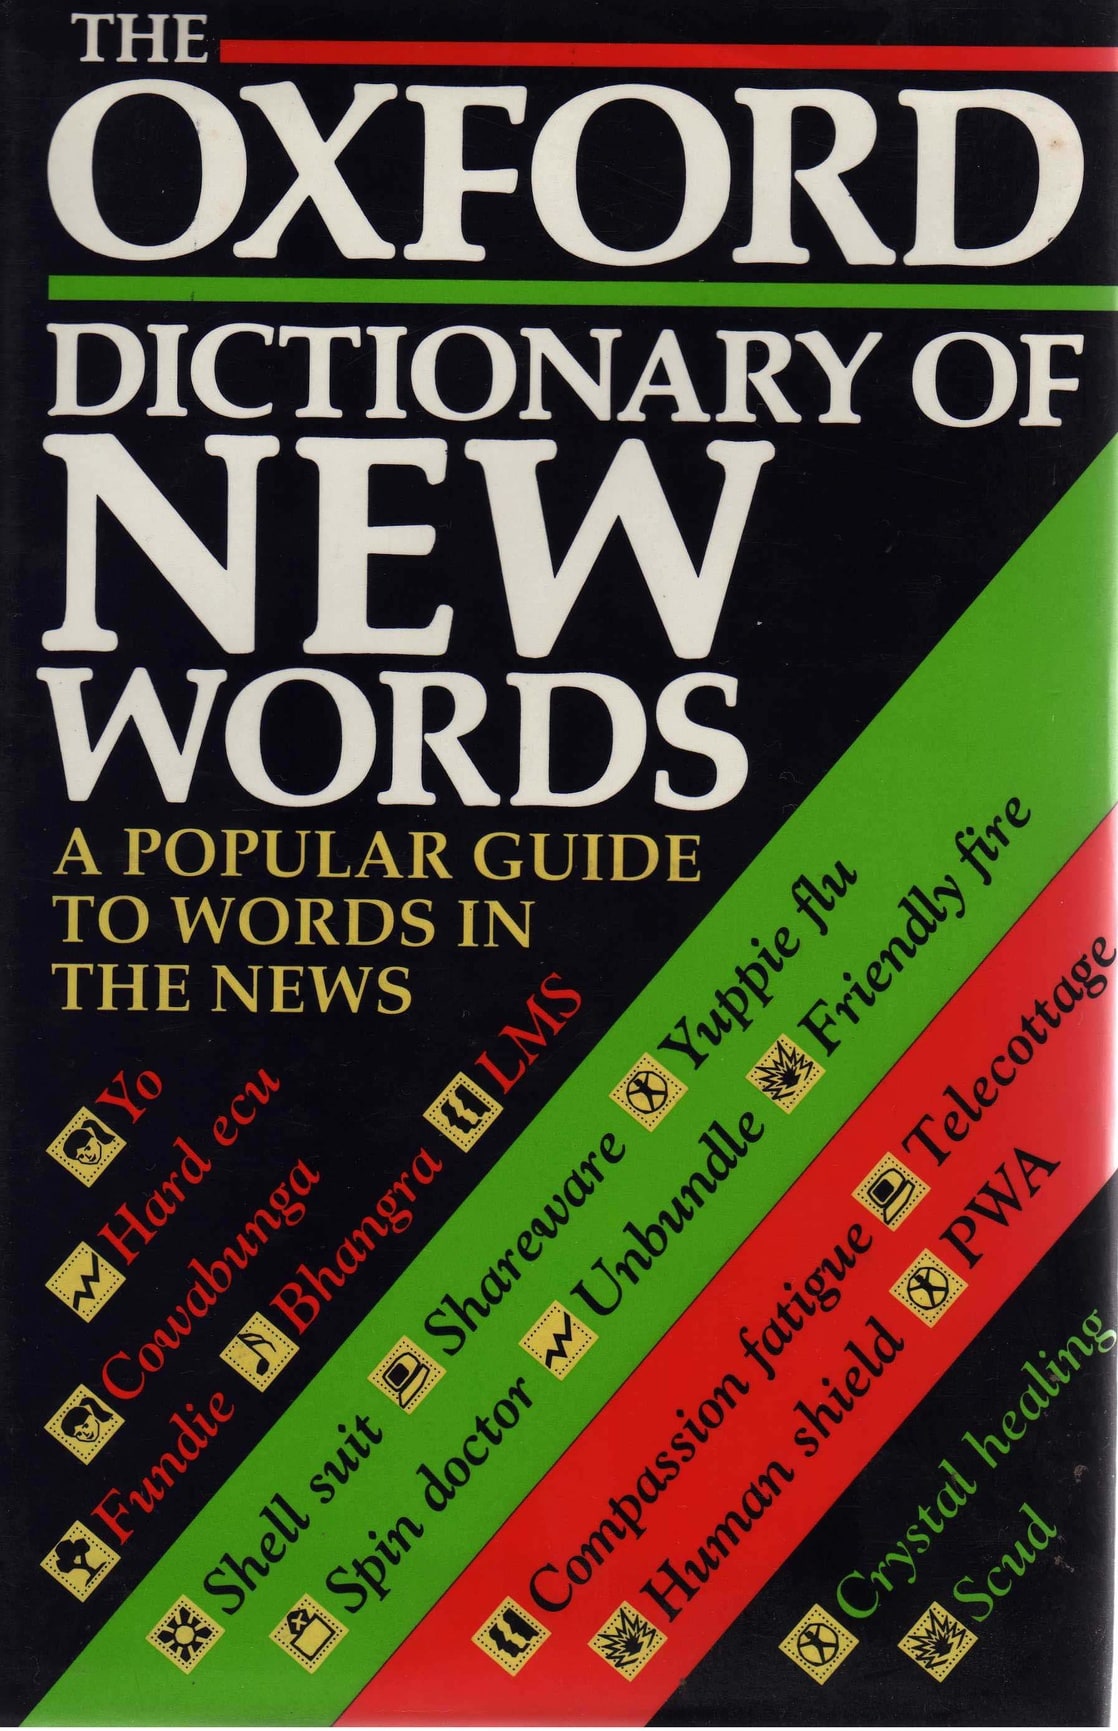 The Oxford Dictionary of New Words Popular Guide to Words in the News